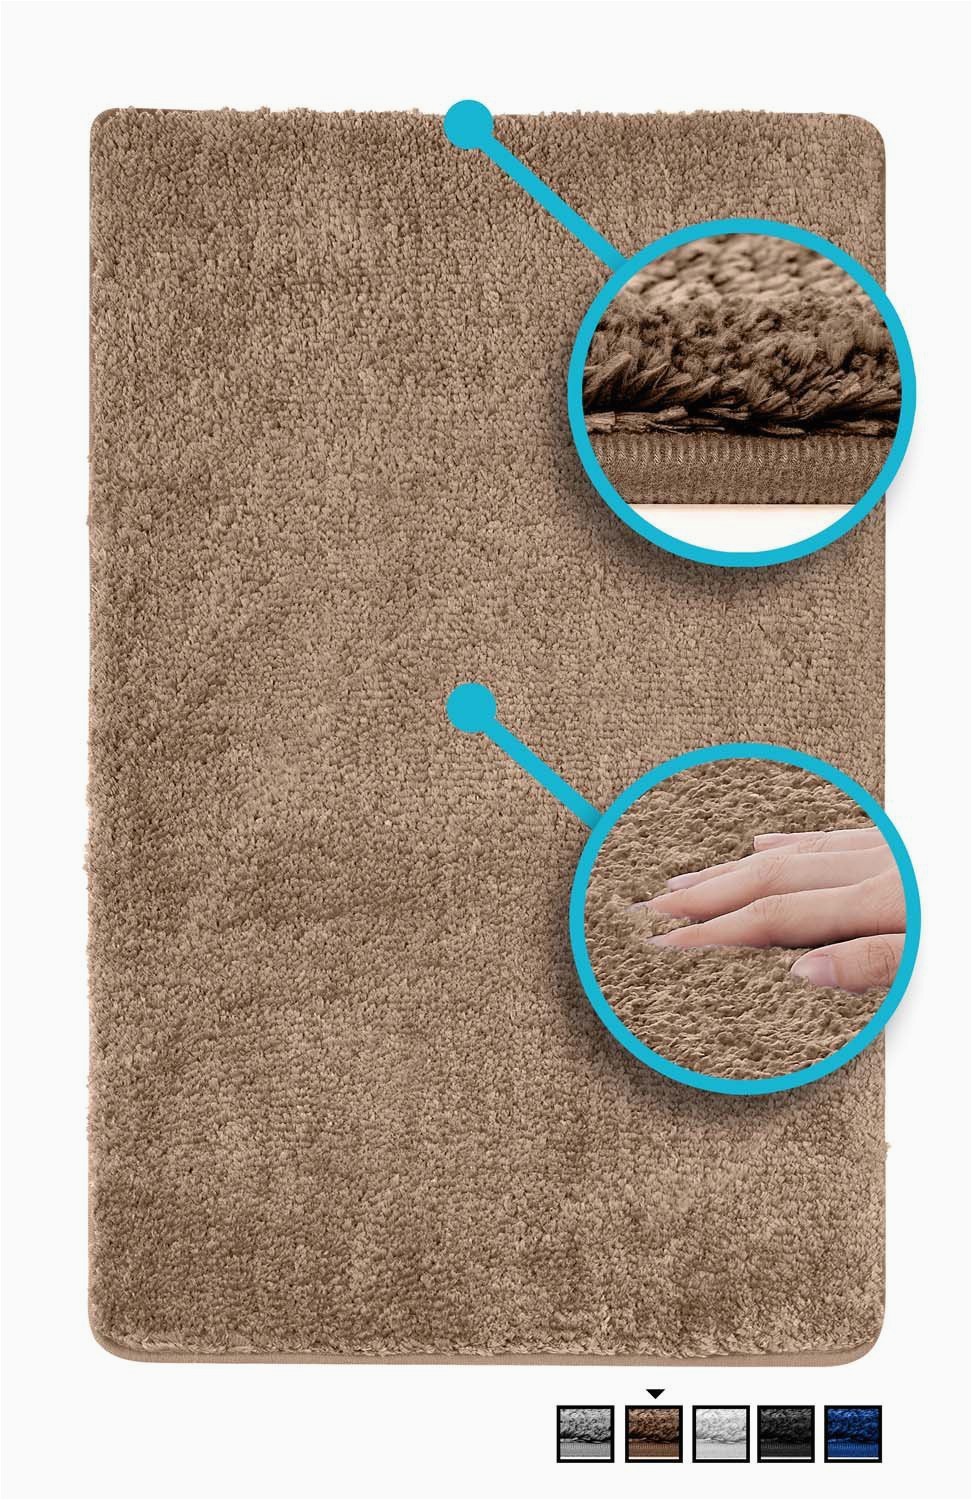 Bathroom Rugs with Non Skid Backing Luxe Rug Luxuriously Plush Microfiber Bathroom Rugs Non Slip Backing 19 5 X 31 5 In